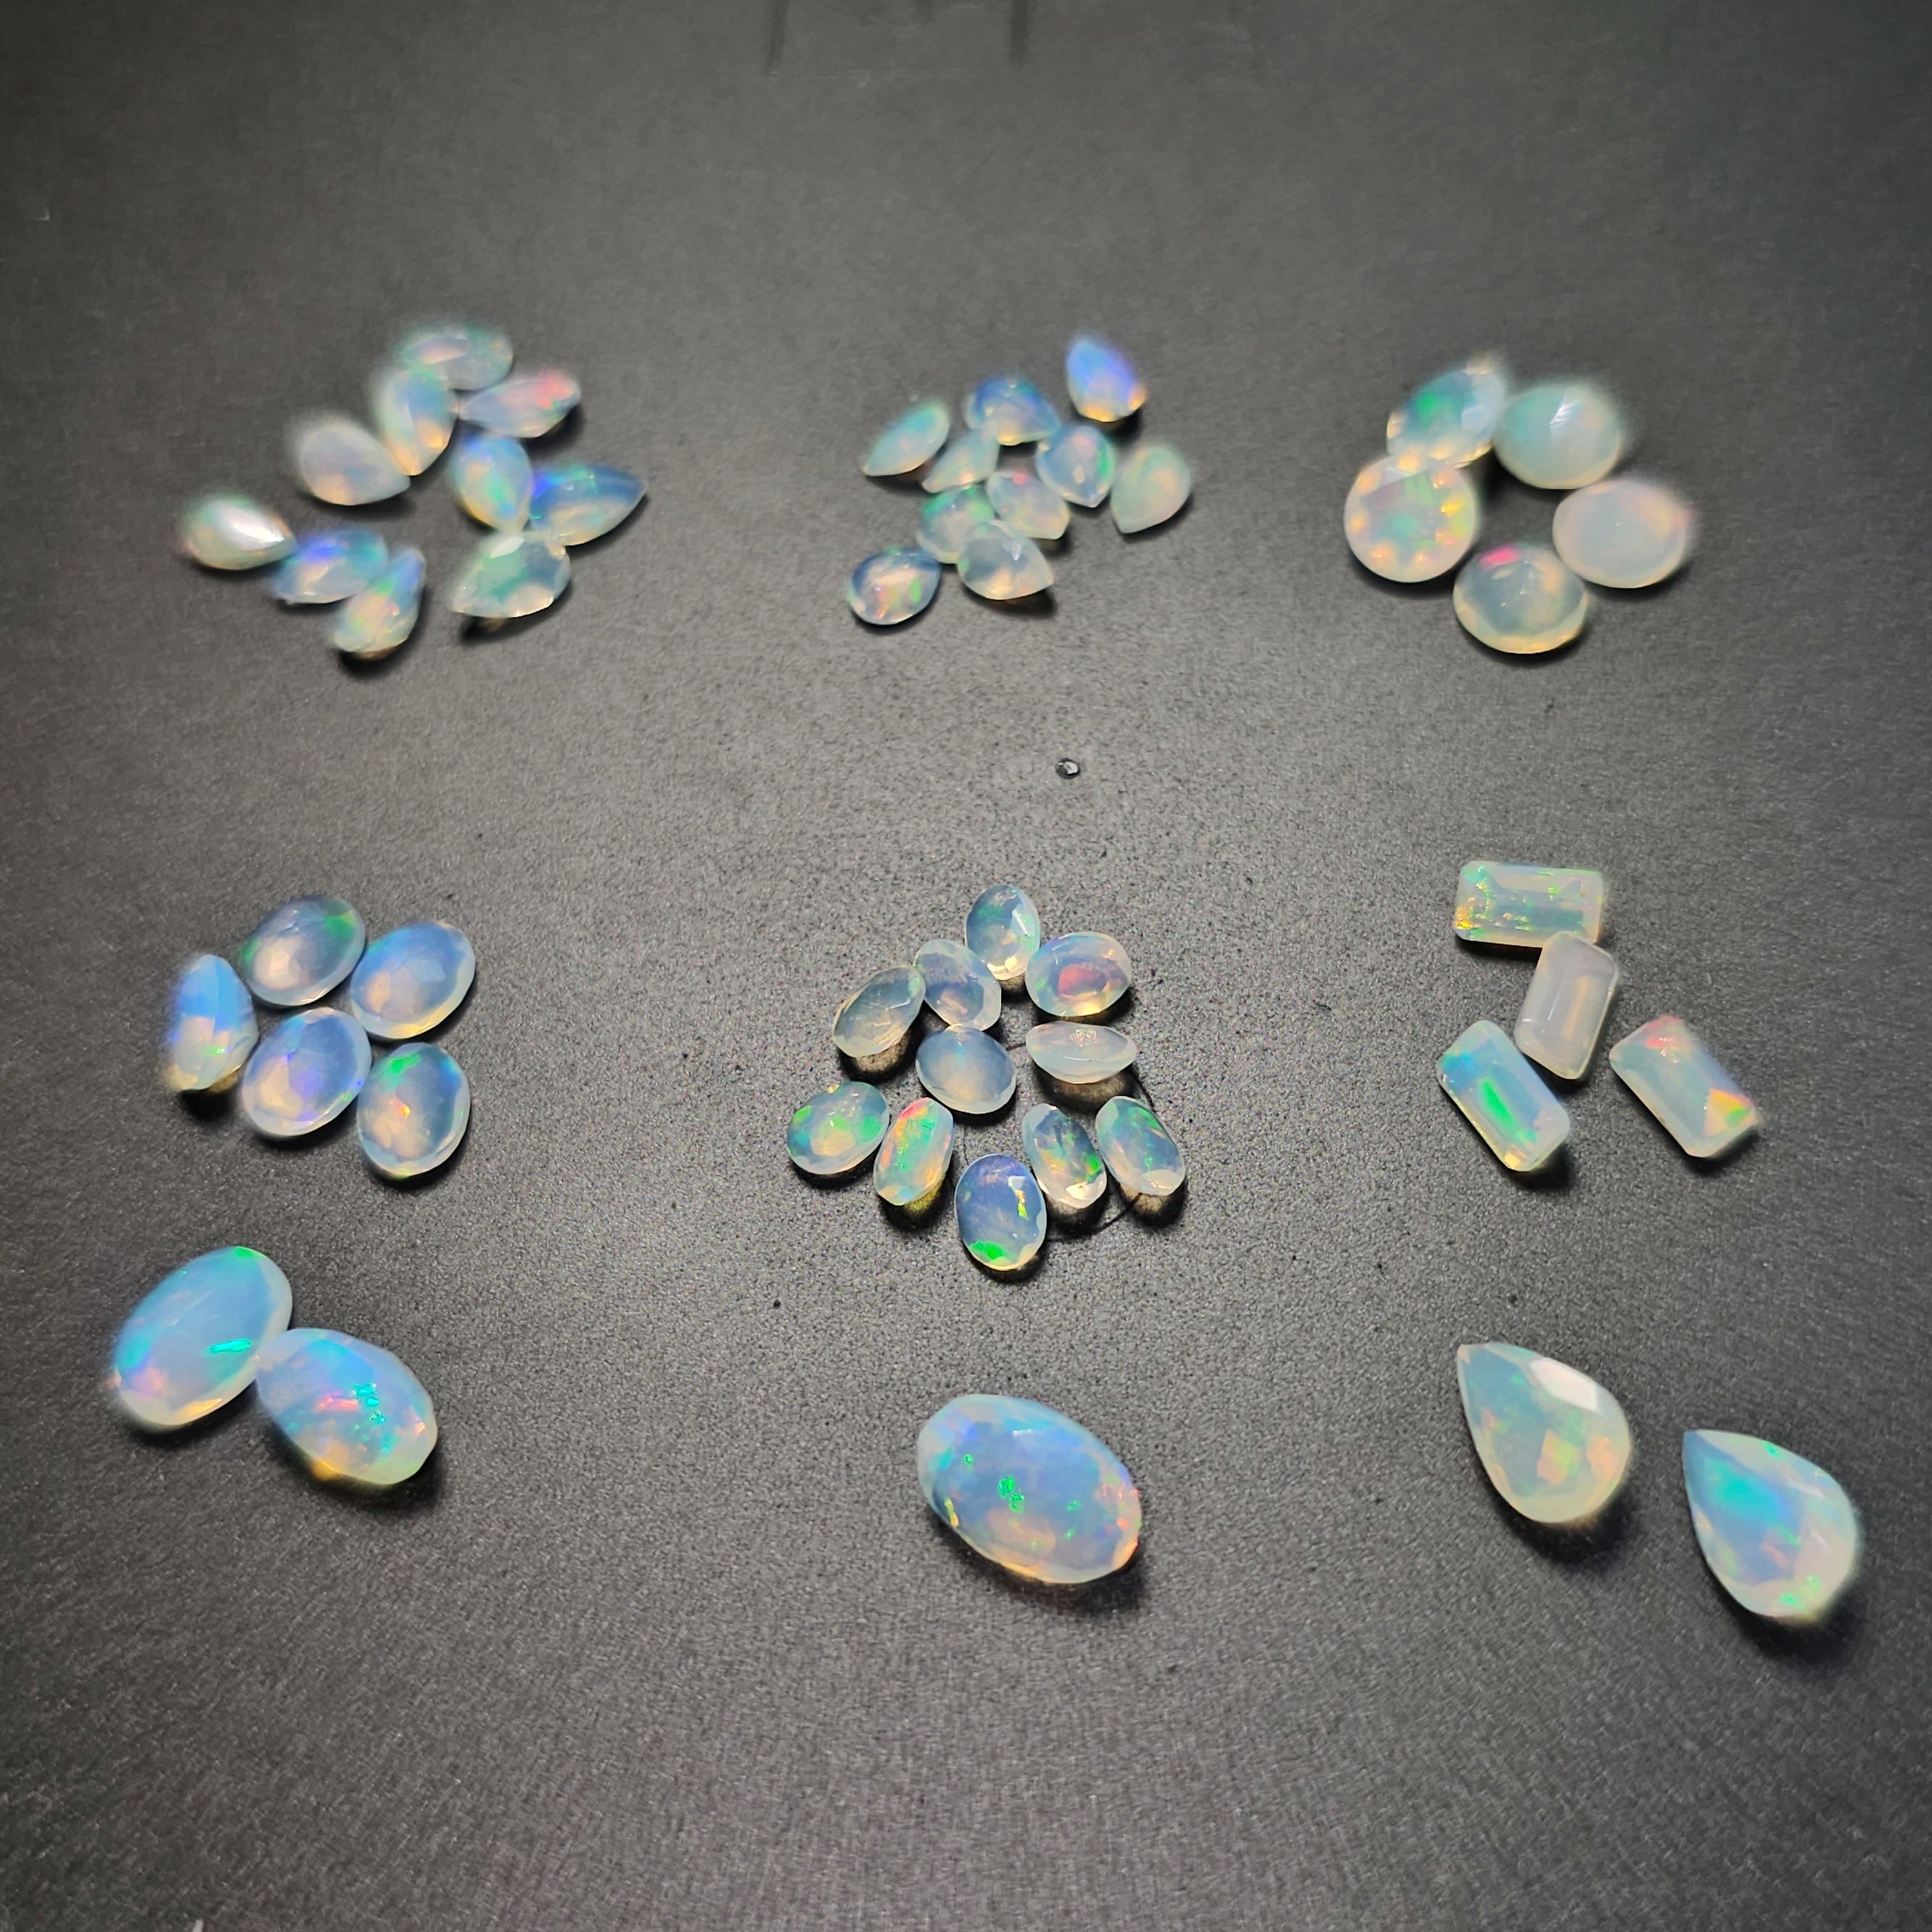 8 Assorted Faceted Natural Welo Opals Set | 4mm to 8mm - The LabradoriteKing